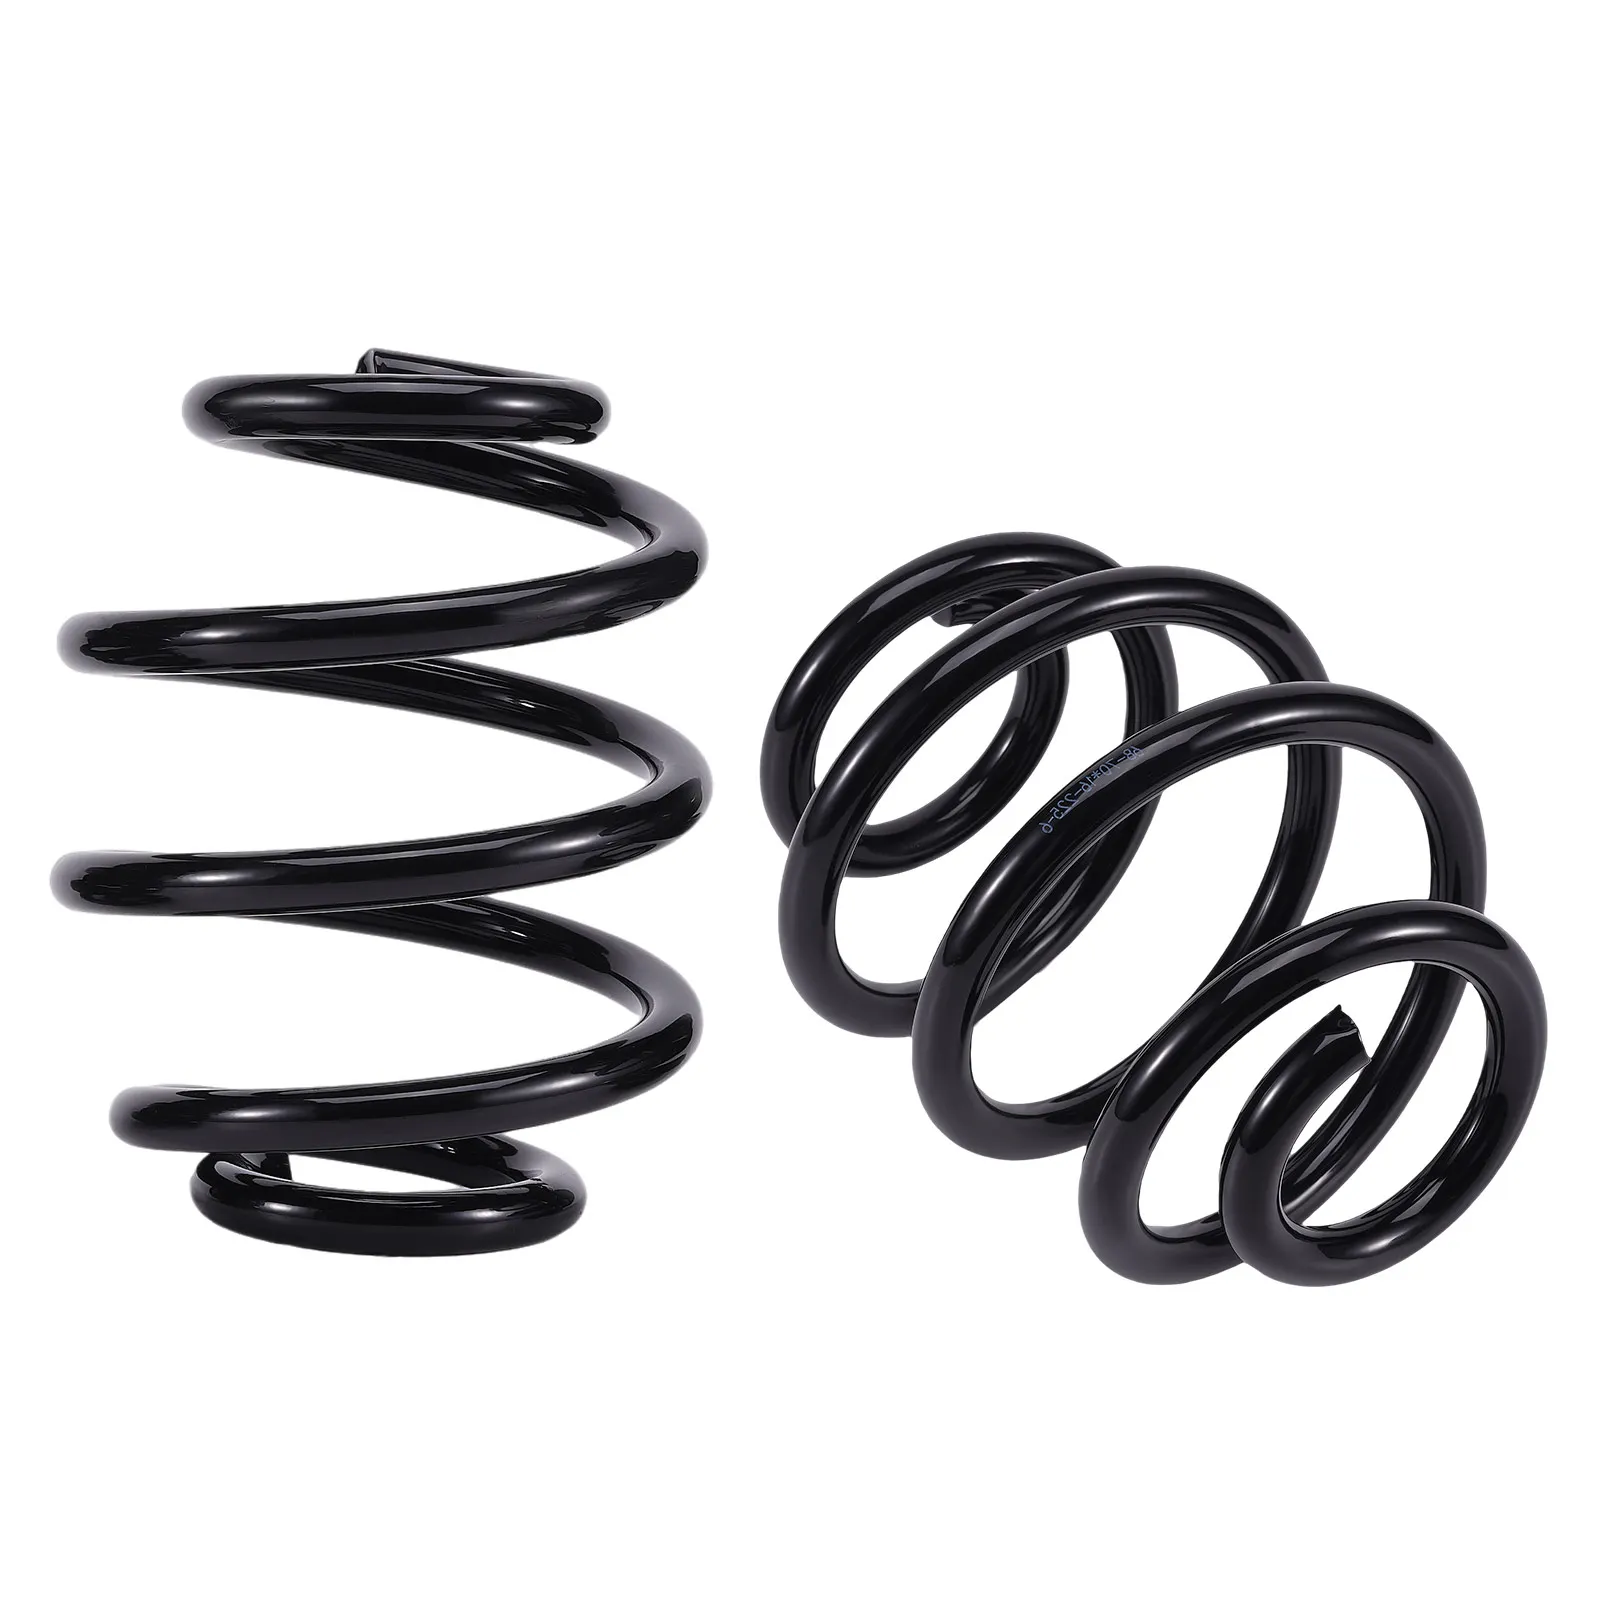 

5" Drop Rear Lowered Coil Springs For Chevy C10 GMC C15 1/2 Ton Pickup 1963-1972